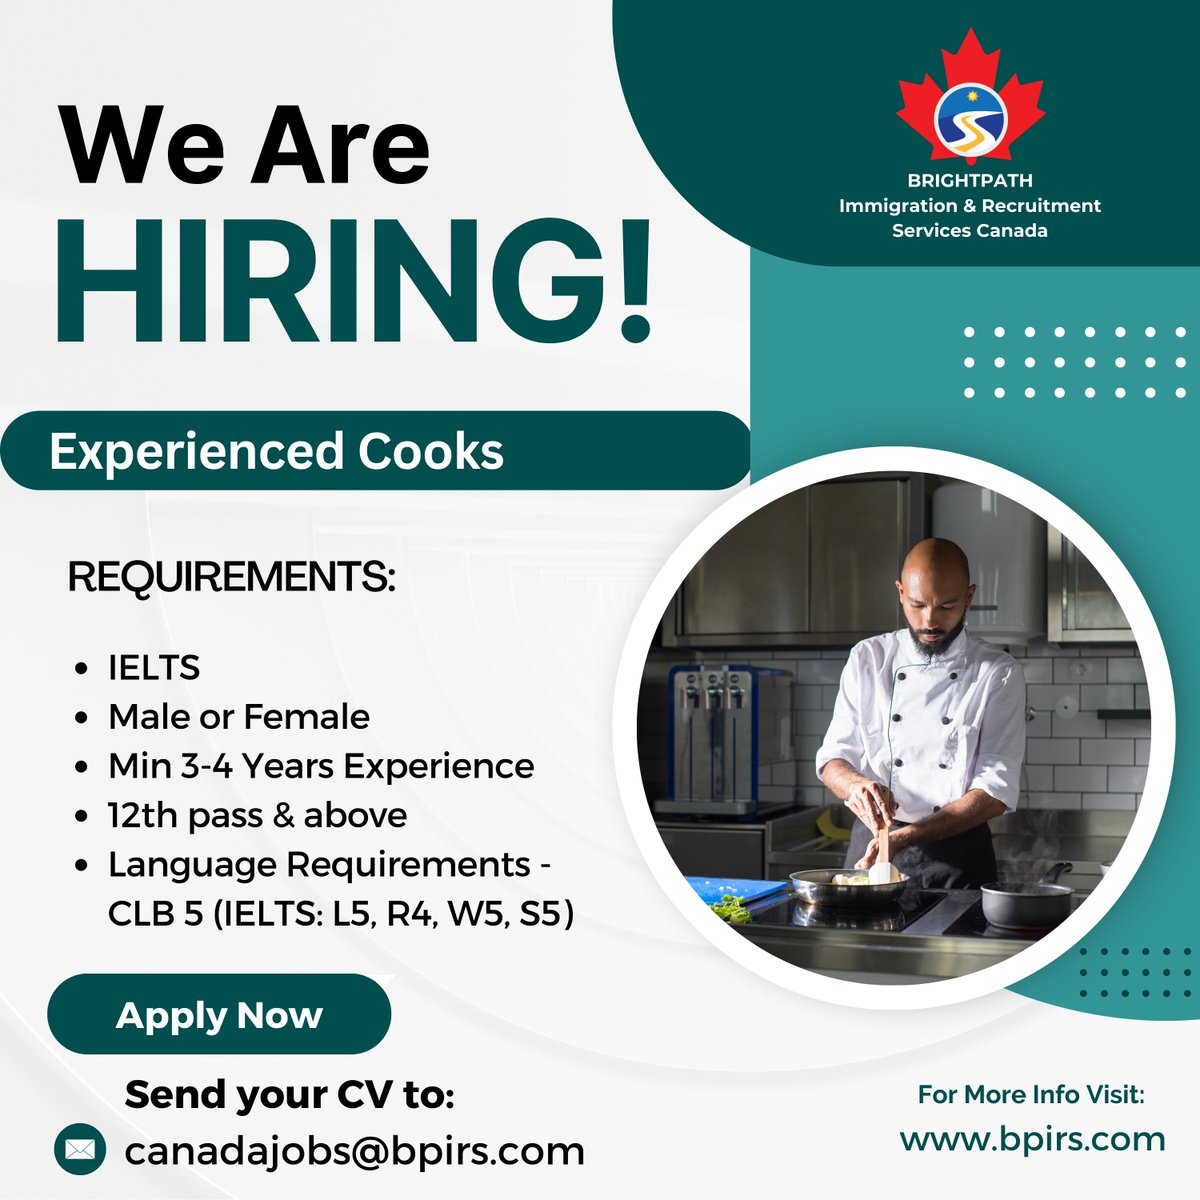 We're Hiring!
Inside / Outside Canada
Experienced Cooks

🍁CONTACT🍁
📧: canadajobs@bpirs.com
🌐: bpirs.com

#bpirs #canadaimmigration #canada #workpermitcanada #permanentresident #hiringnow #cook #eperience #joboffering